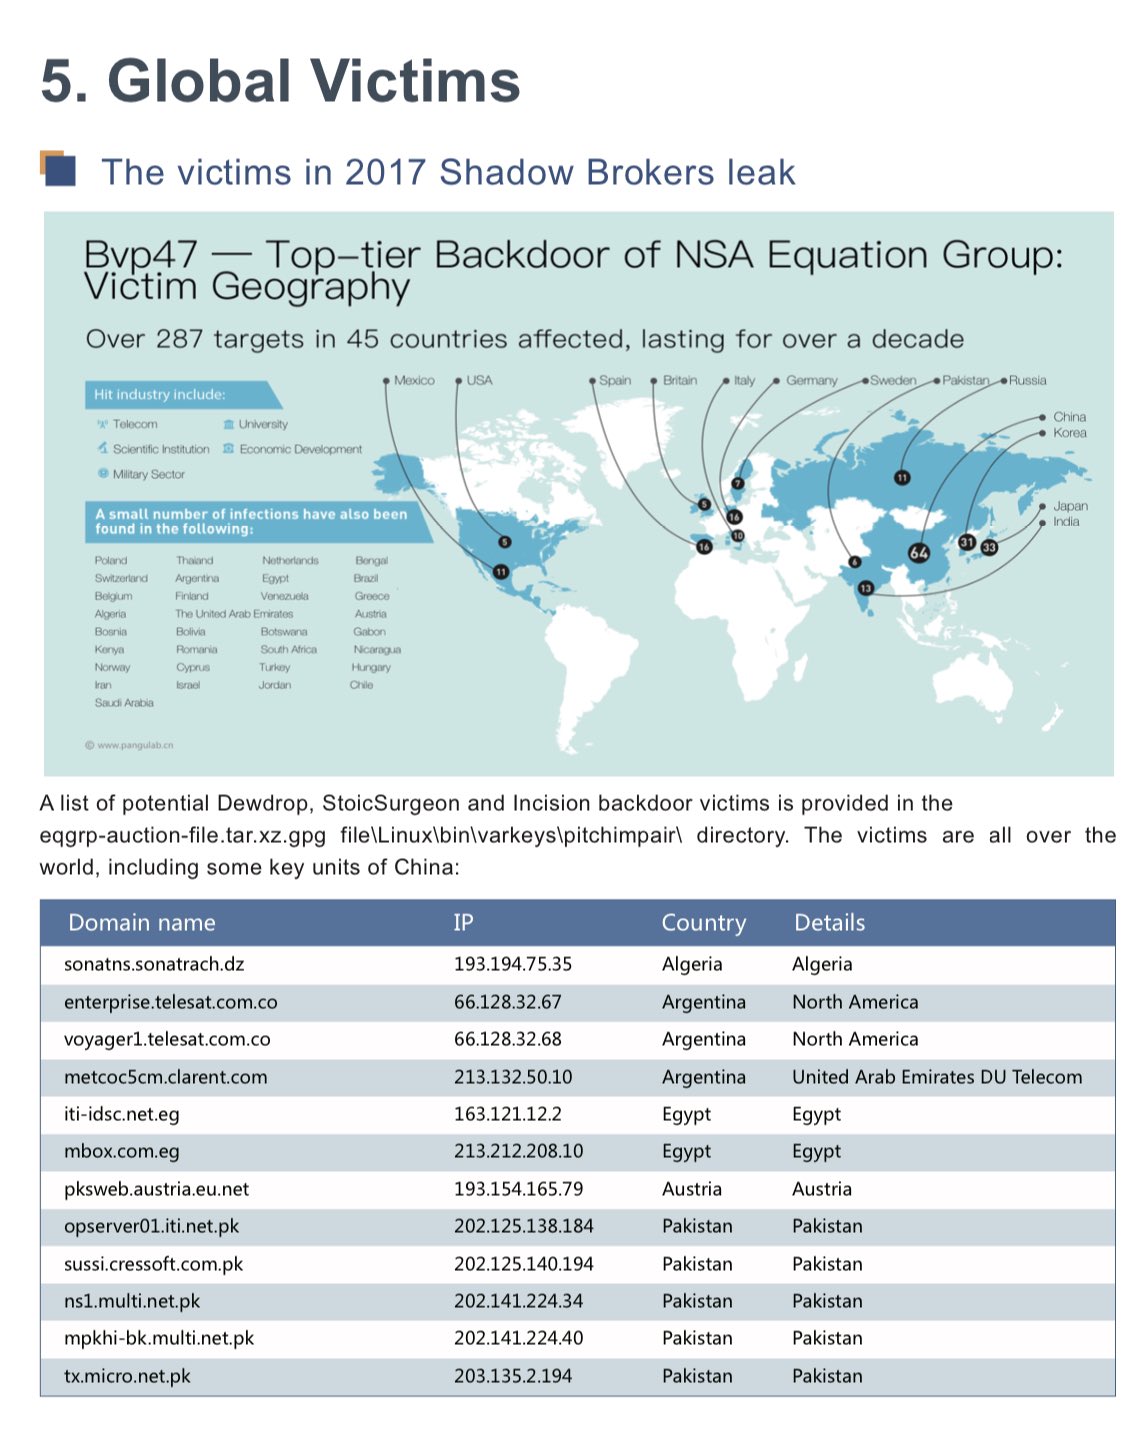 The Bvp47 - a Top-tier Backdoor of US NSA Equation Group